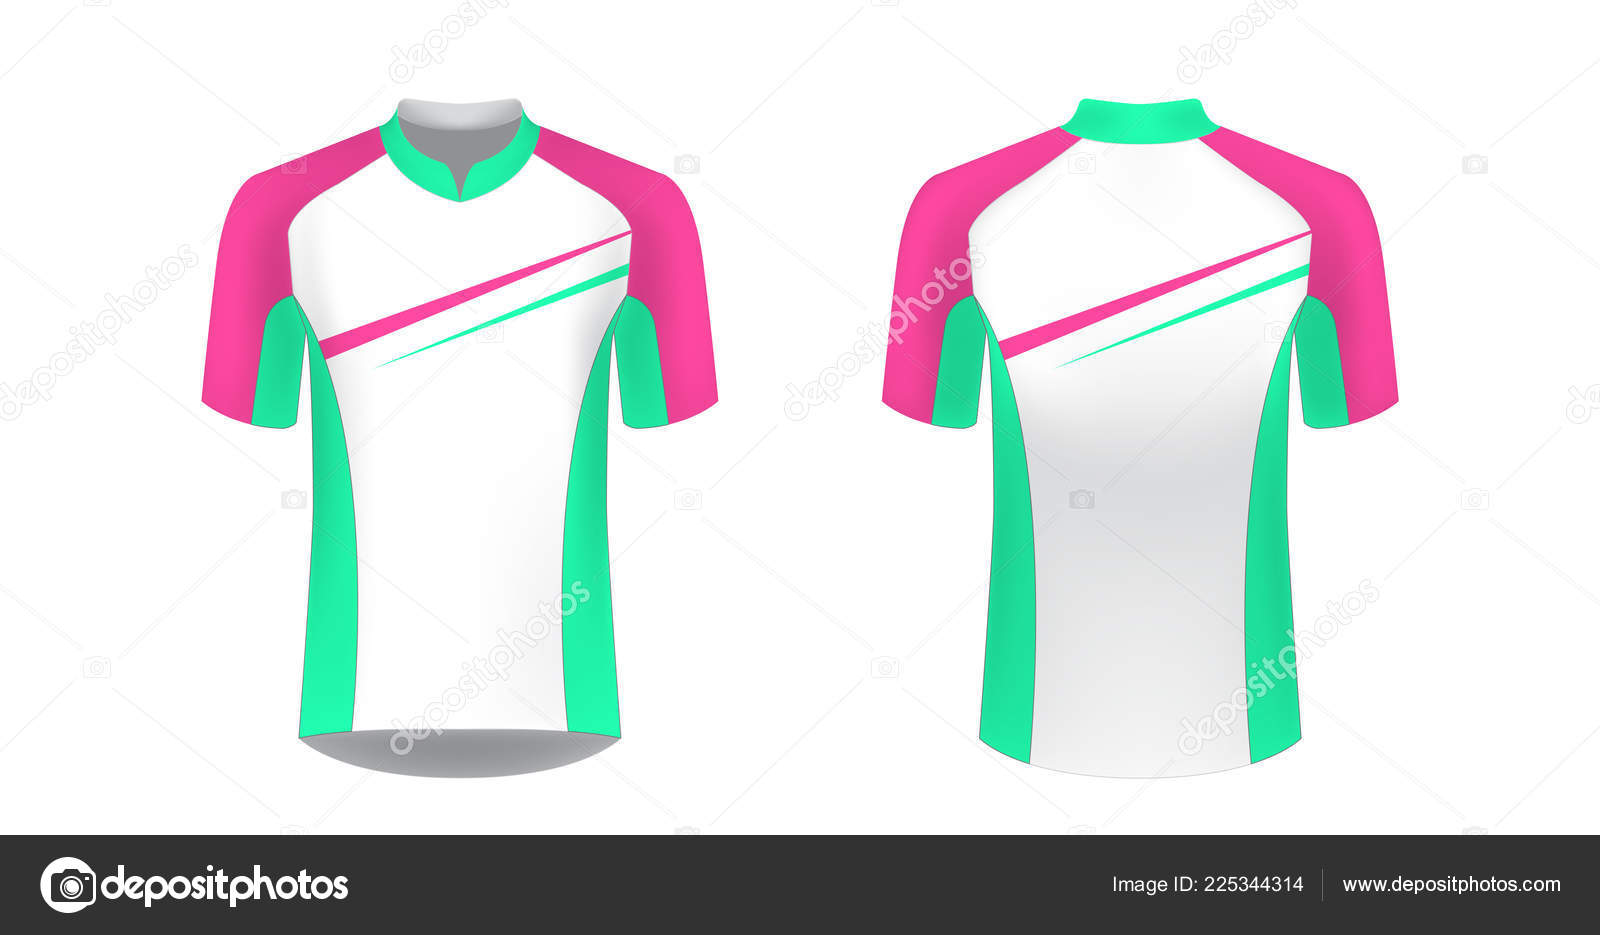 vector pattern jersey design for sport sublimation printing